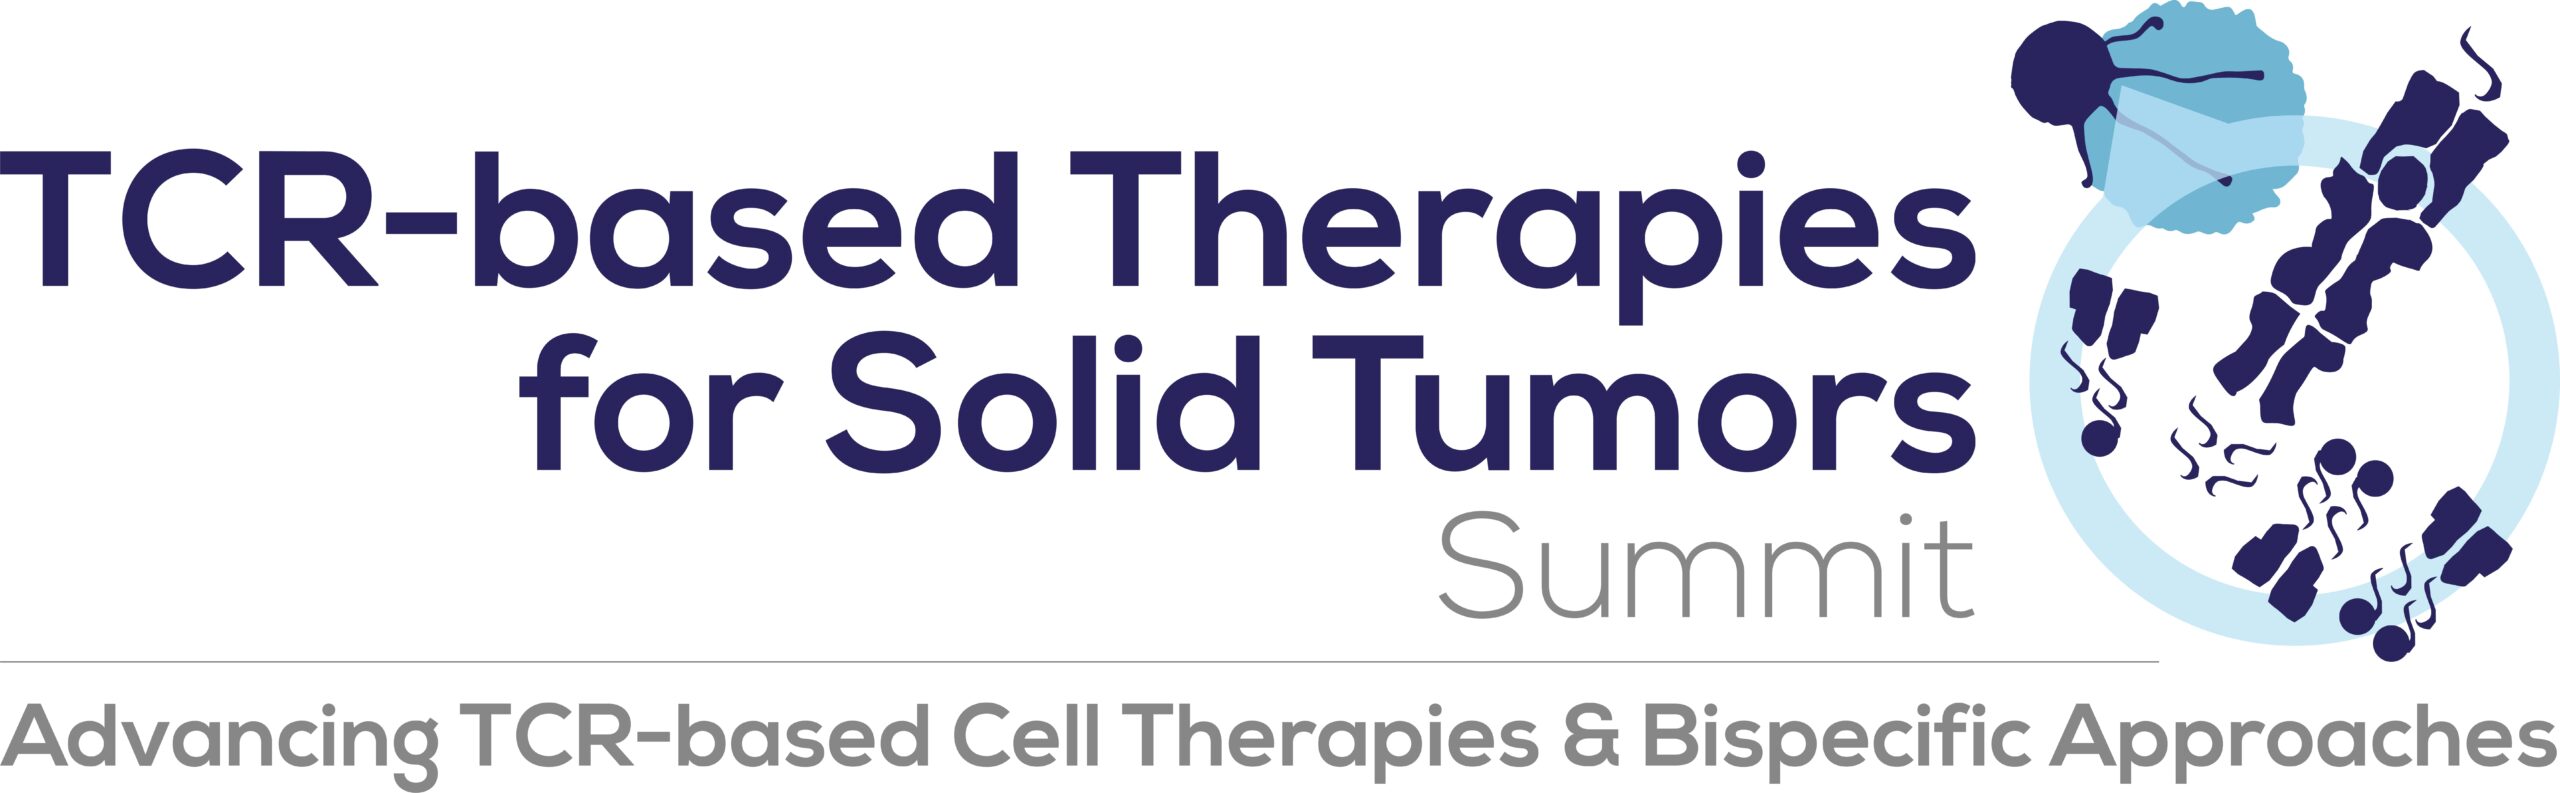 TCR-based Therapies for Solid Tumors Summit logo WITH TAG-min (1)